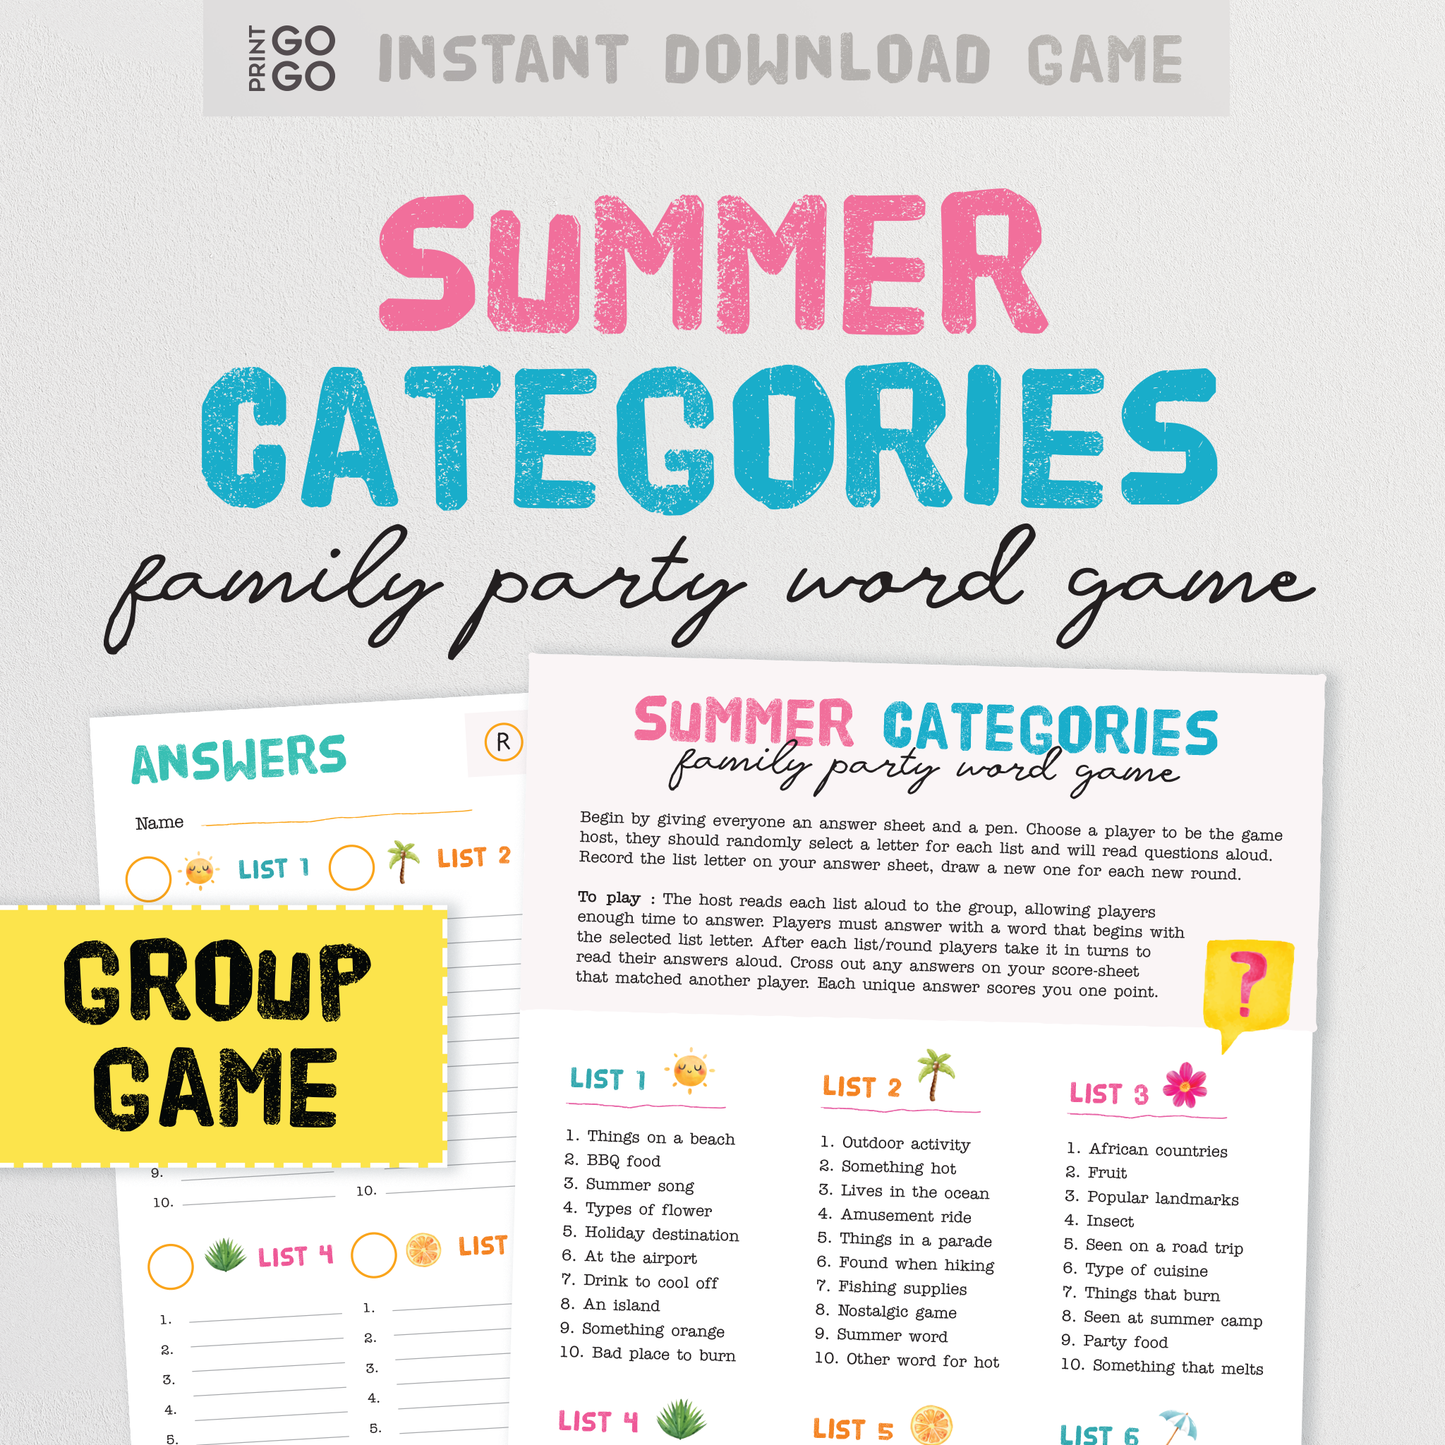 Summer Family Categories - The Game Of Guessing Unique Answers